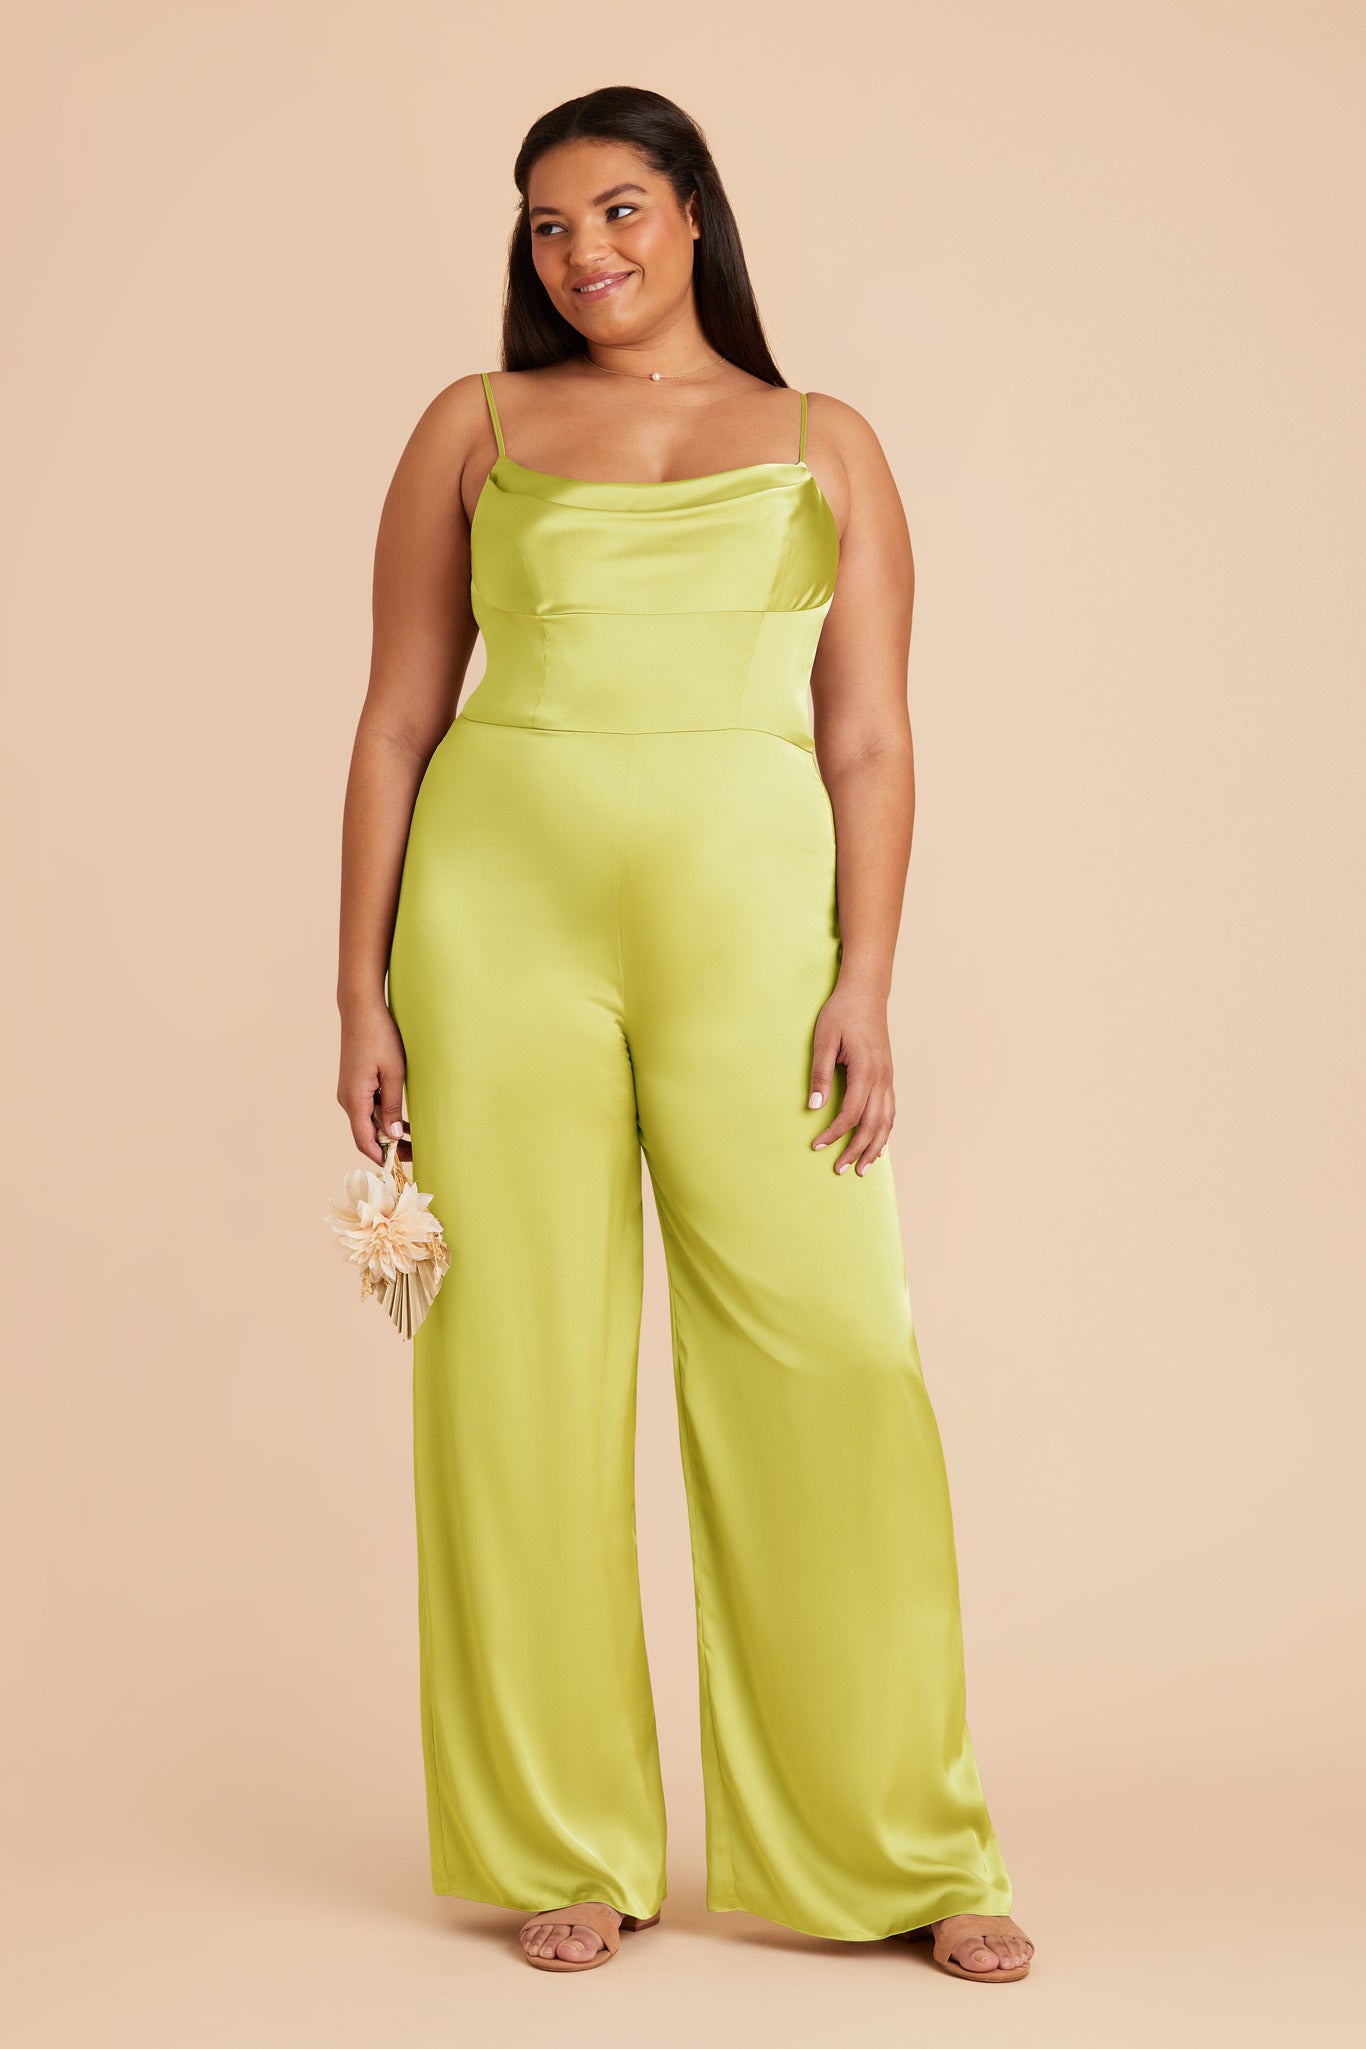 Chartreuse Donna Matte Satin Bridesmaid Jumpsuit by Birdy Grey